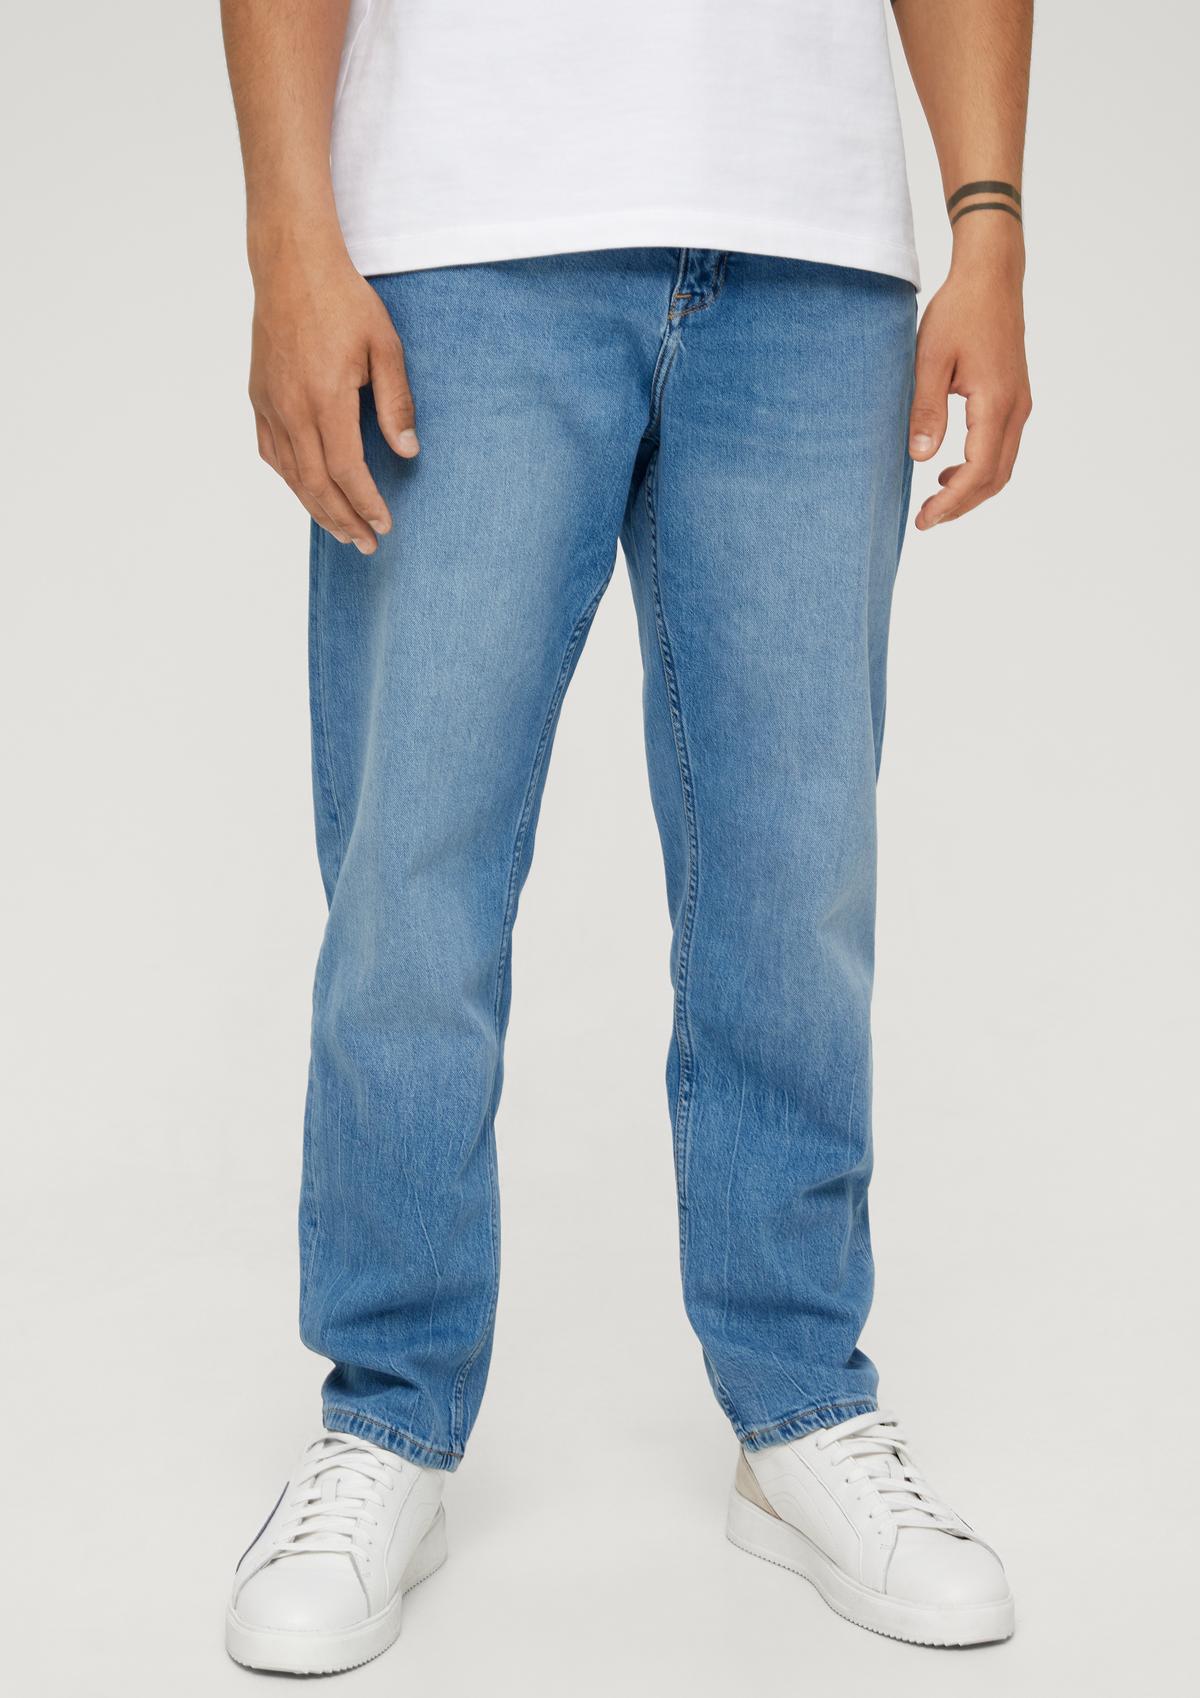 s.Oliver Scube: Jeans hlače kroja Relaxed Fit